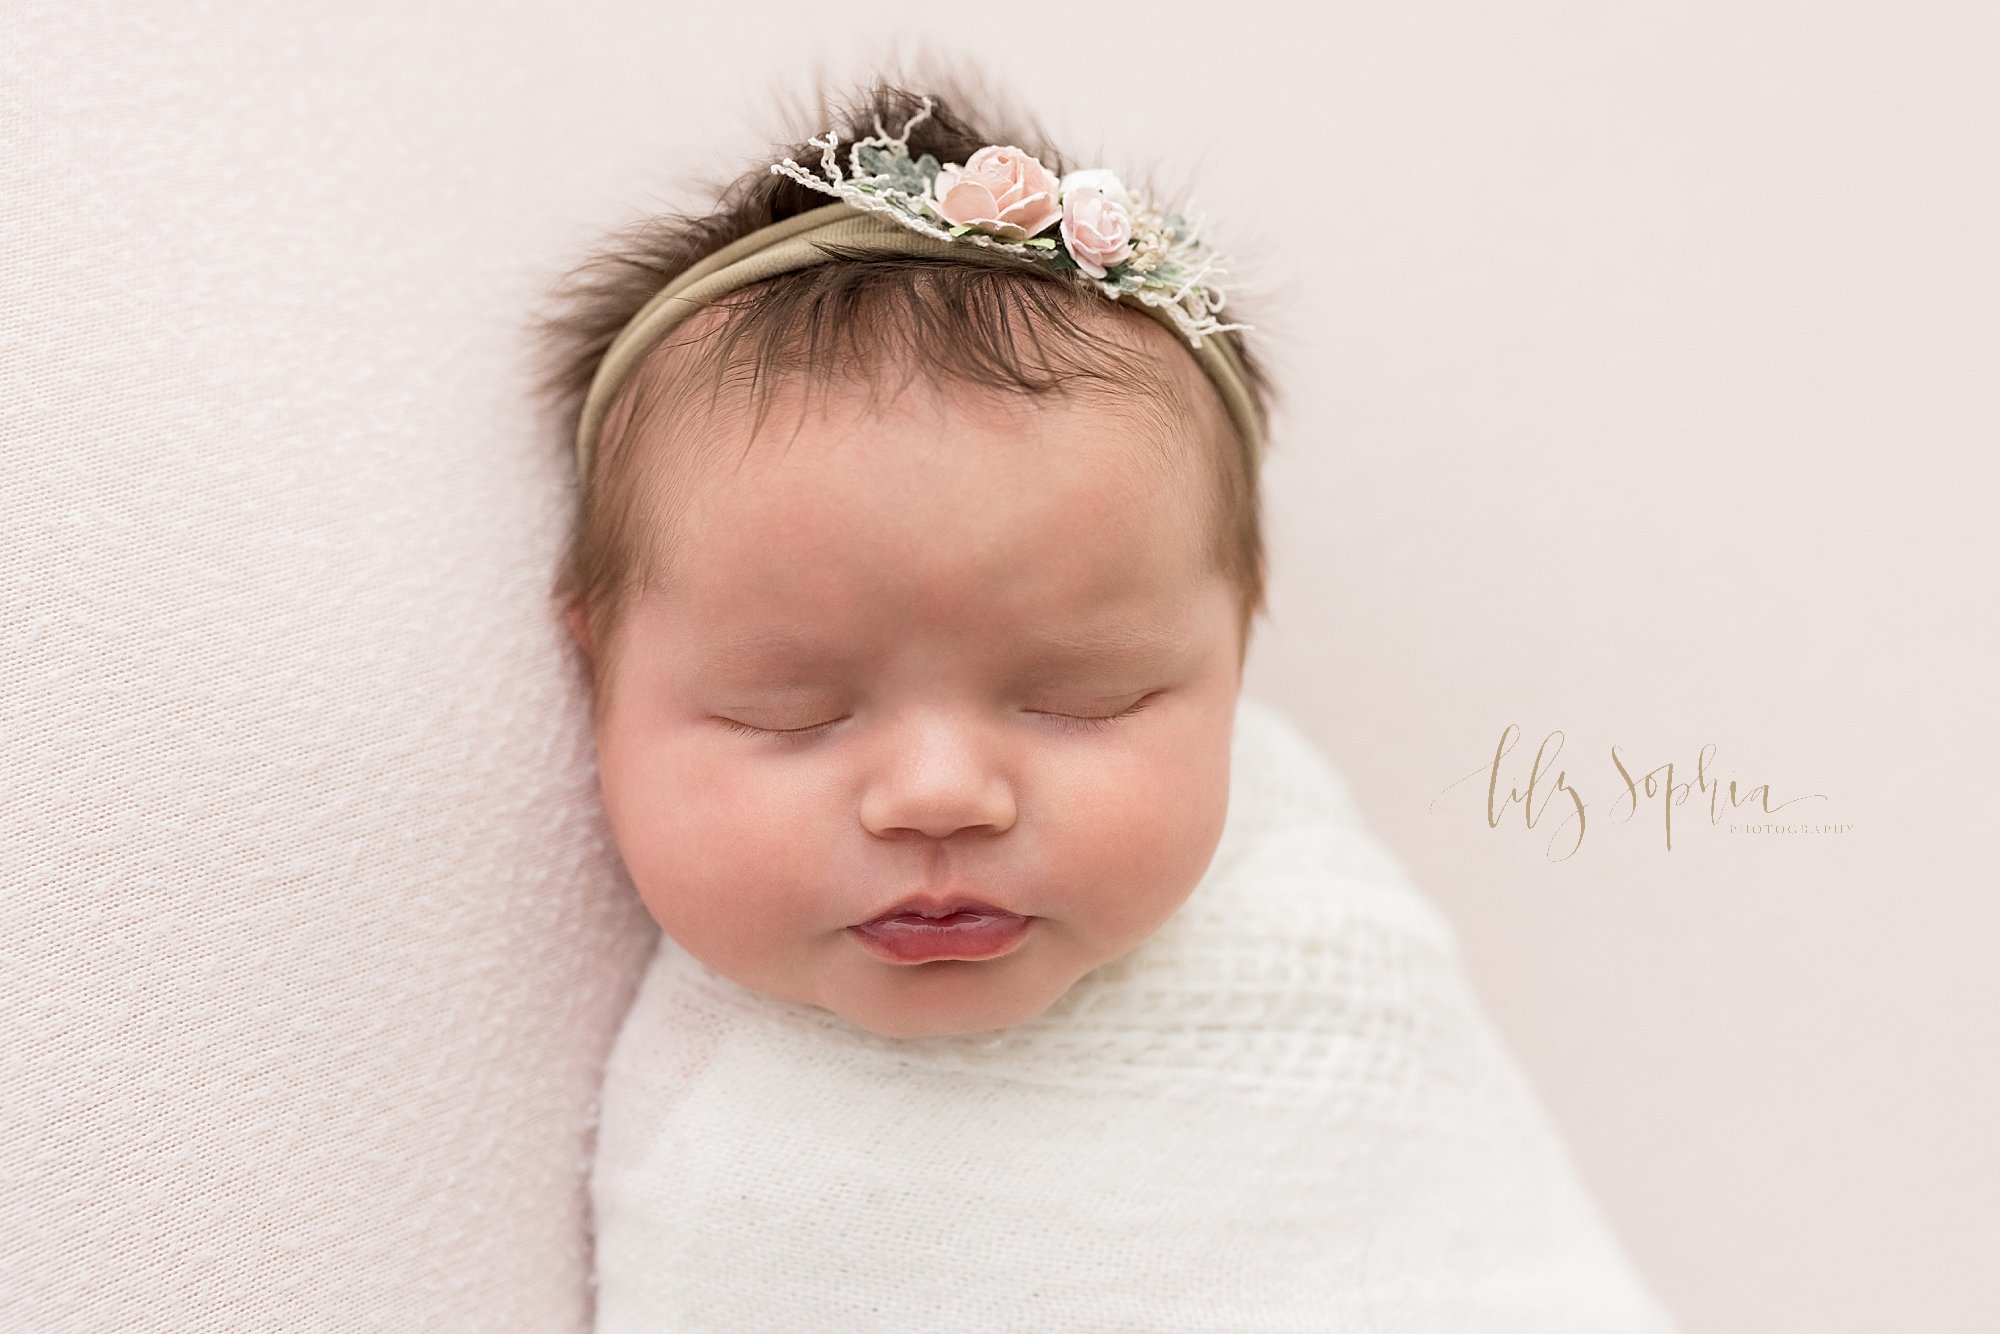  Newborn portrait of a peacefully sleeping newborn baby girl swaddled to her chin in a soft white crocheted blanket wearing a rose headband in her hair as she lies on her back featuring her wispy eyelashes, button nose and plump lips taken in natural